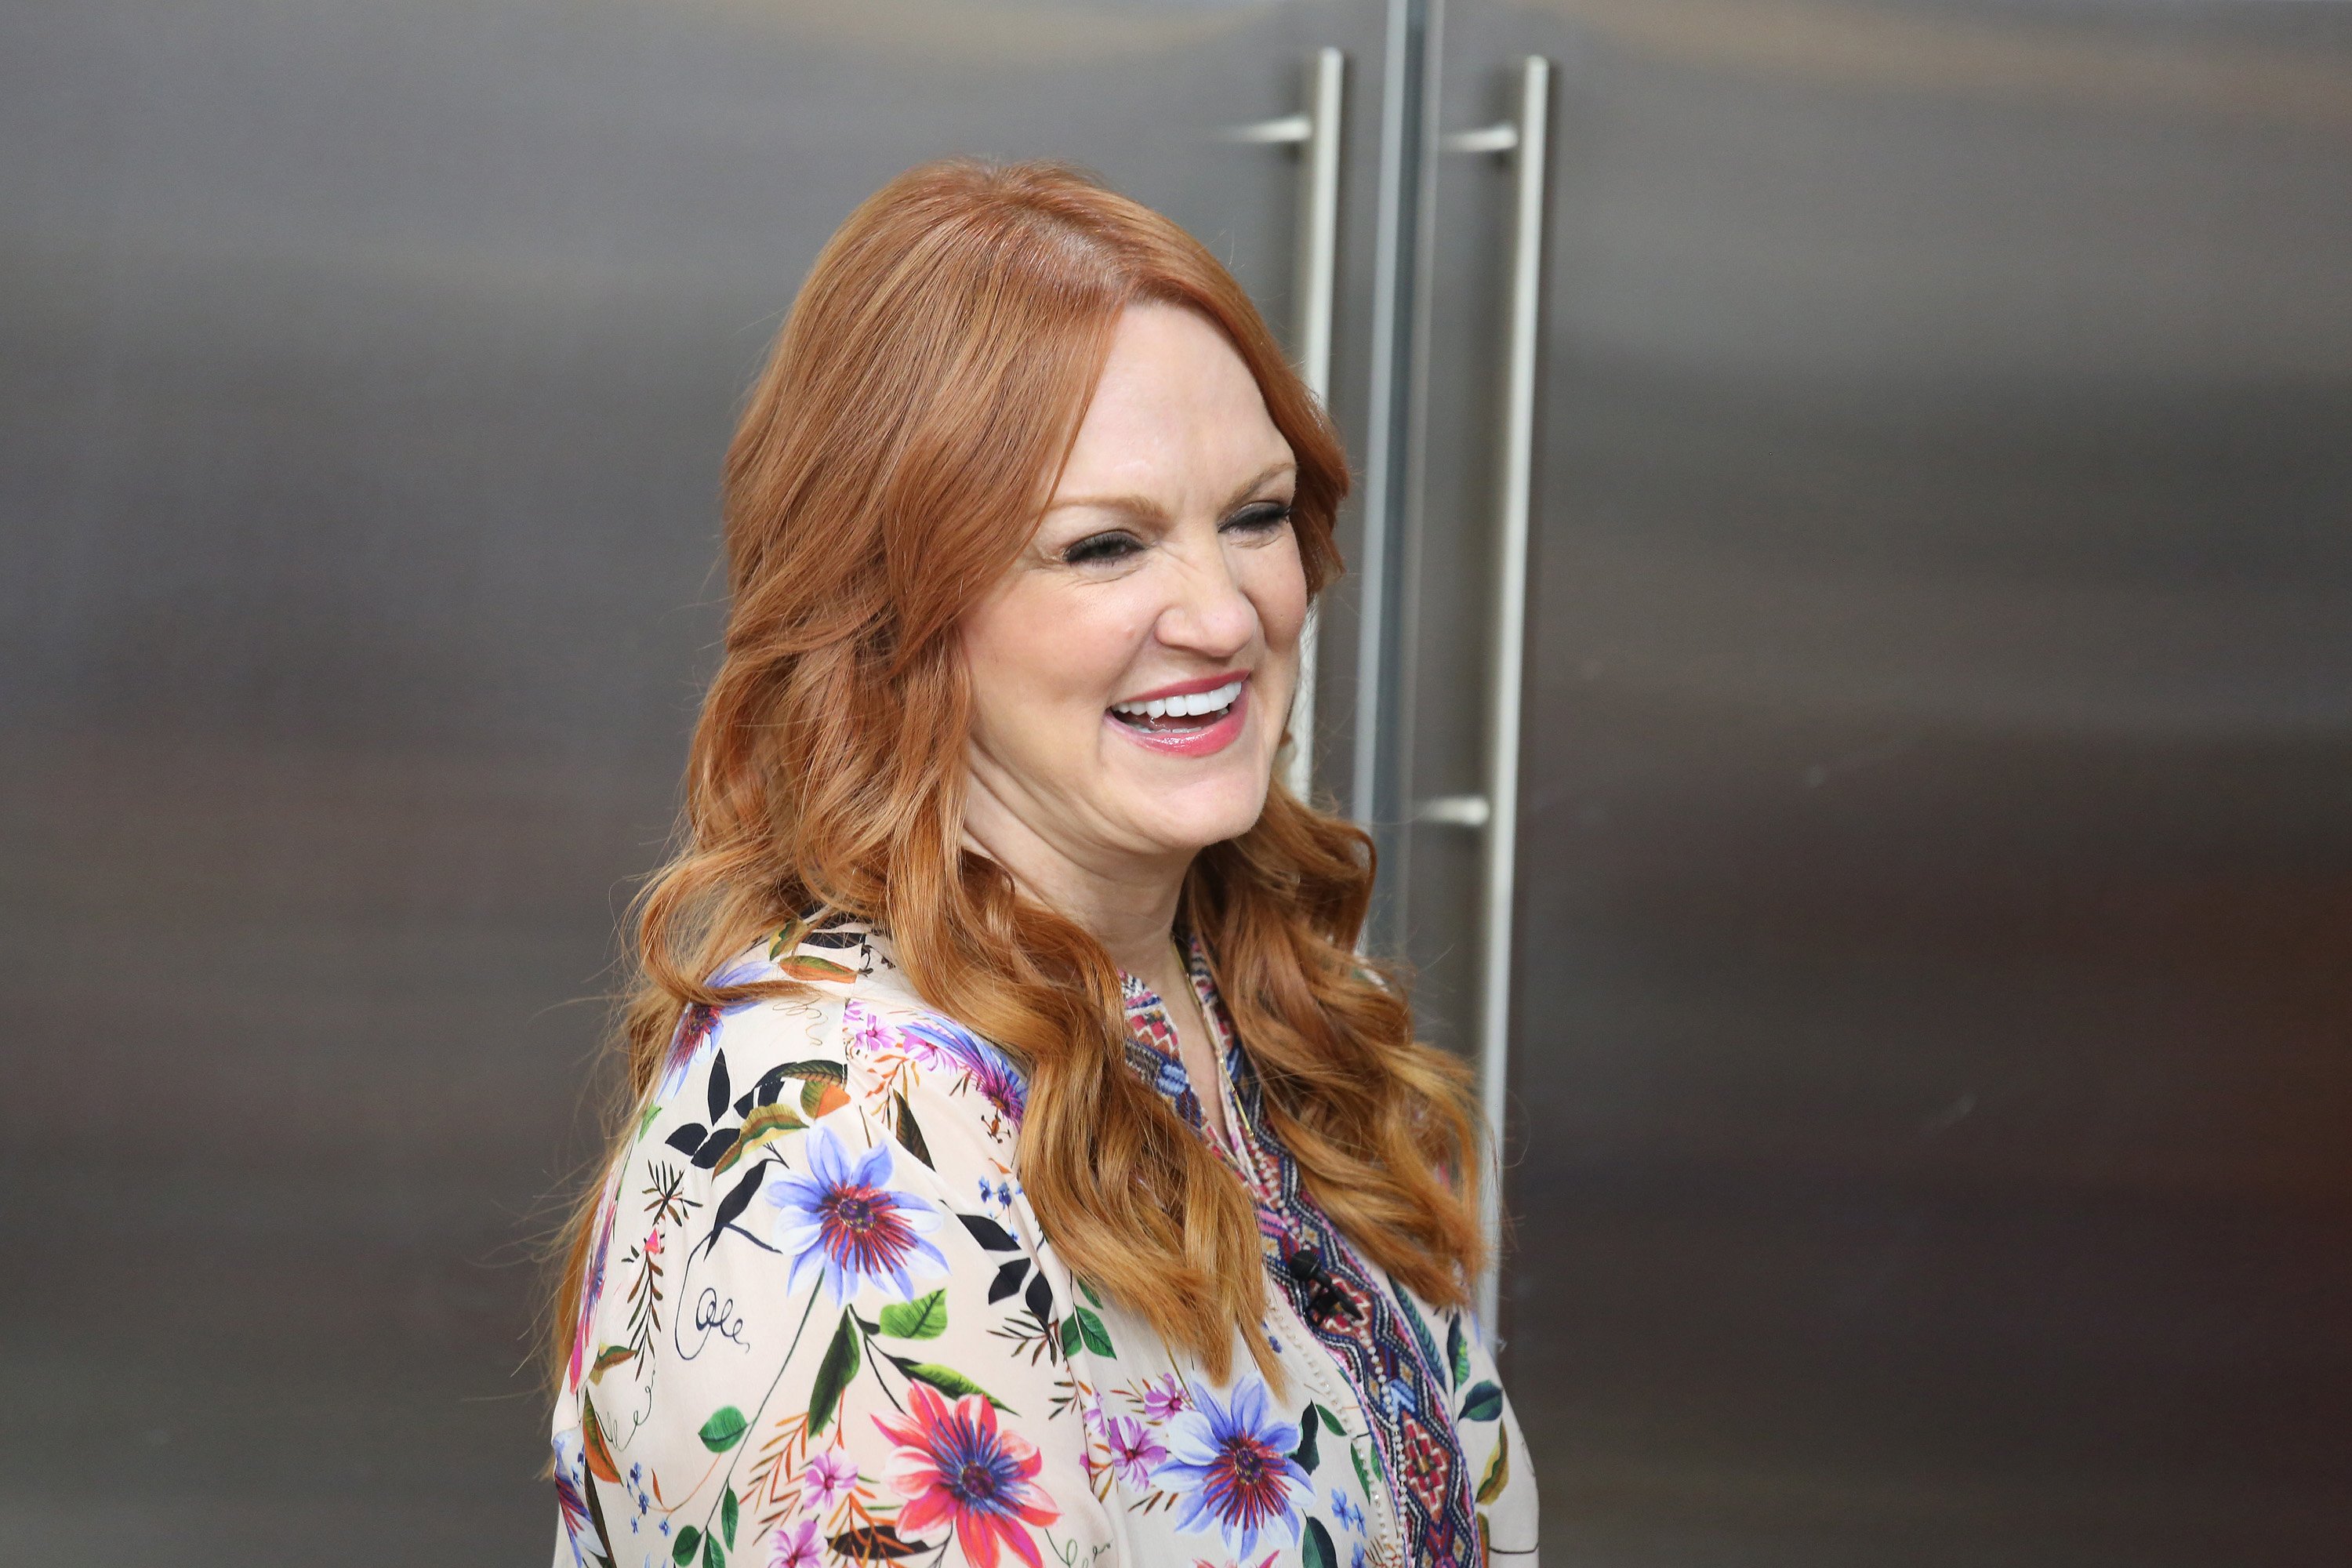 Ree Drummond Offended Some Fans With Controversial Joke About Chicken Wings  Back in Season 2 of 'The Pioneer Woman